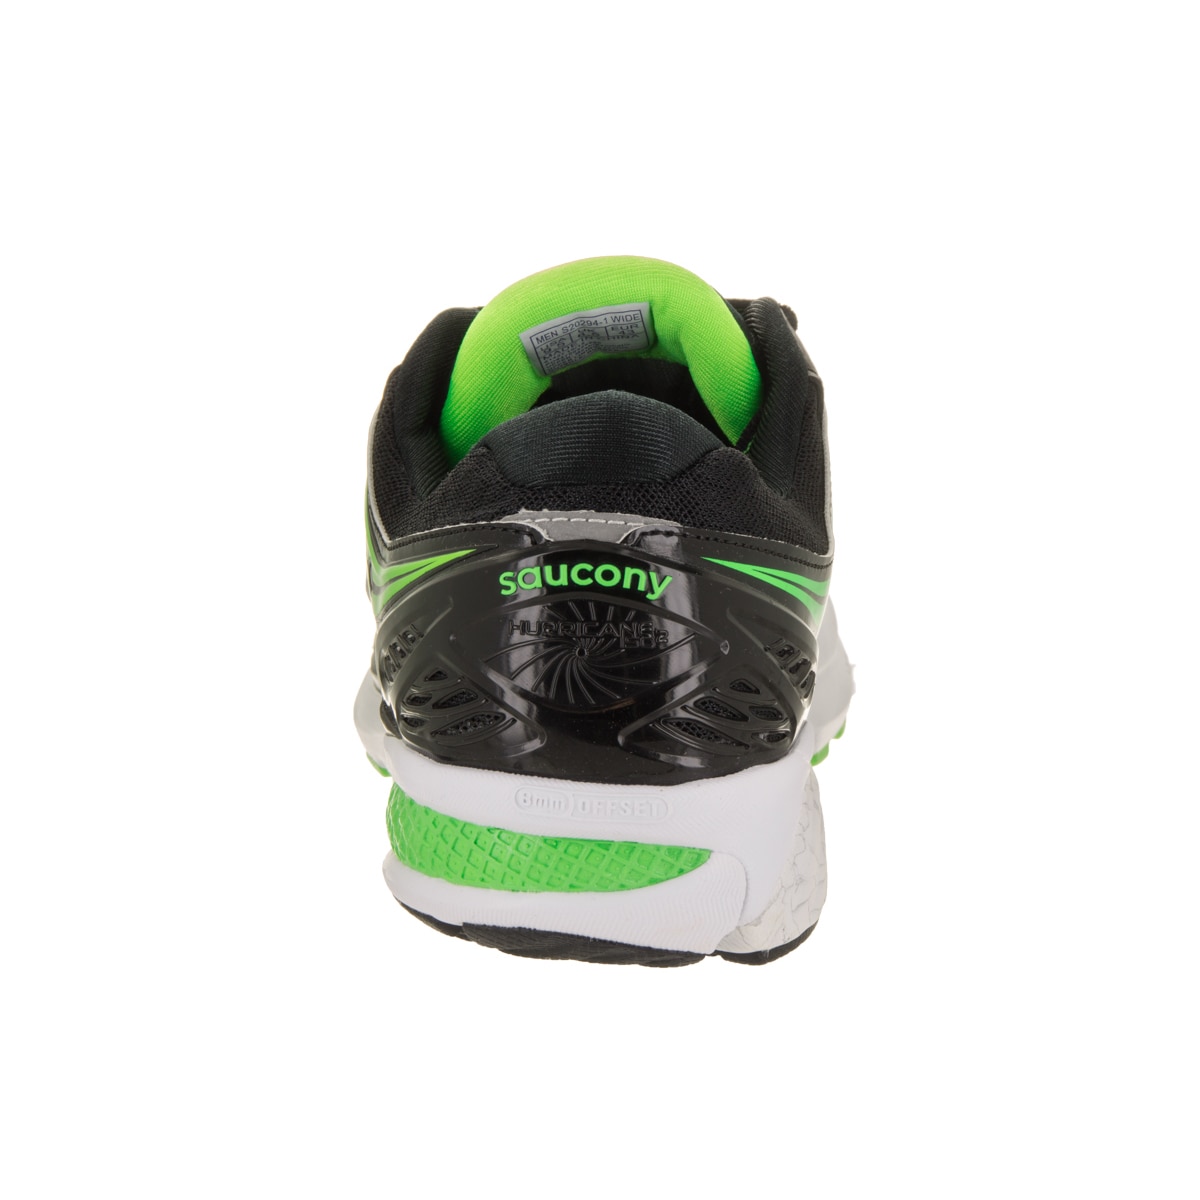 saucony mens wide running shoes